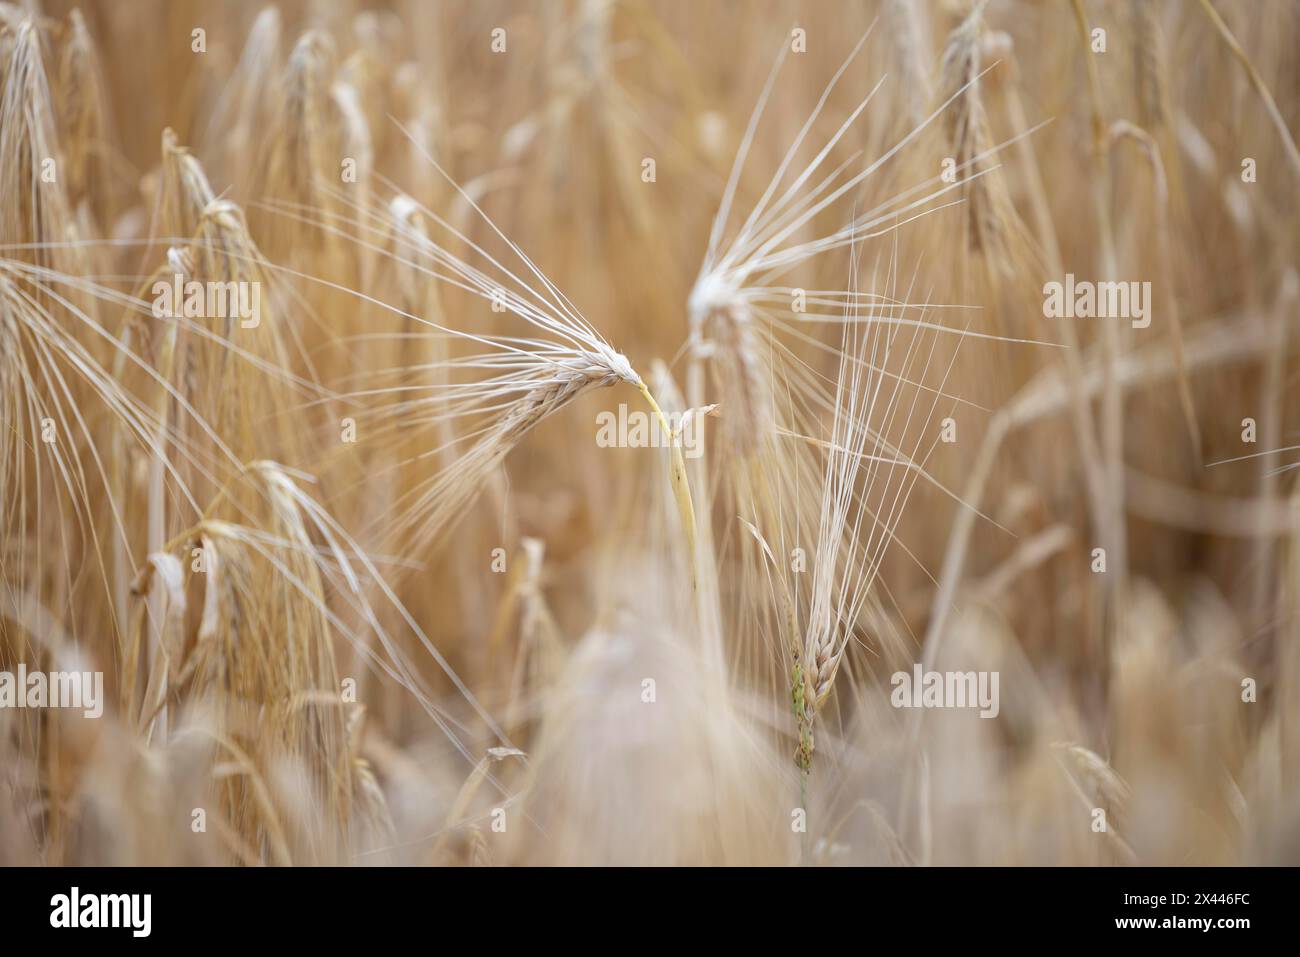 Close-up of individual ripe ears of grain in a field with Barley, Cologne, North Rhine-Westphalia, Germany Stock Photo